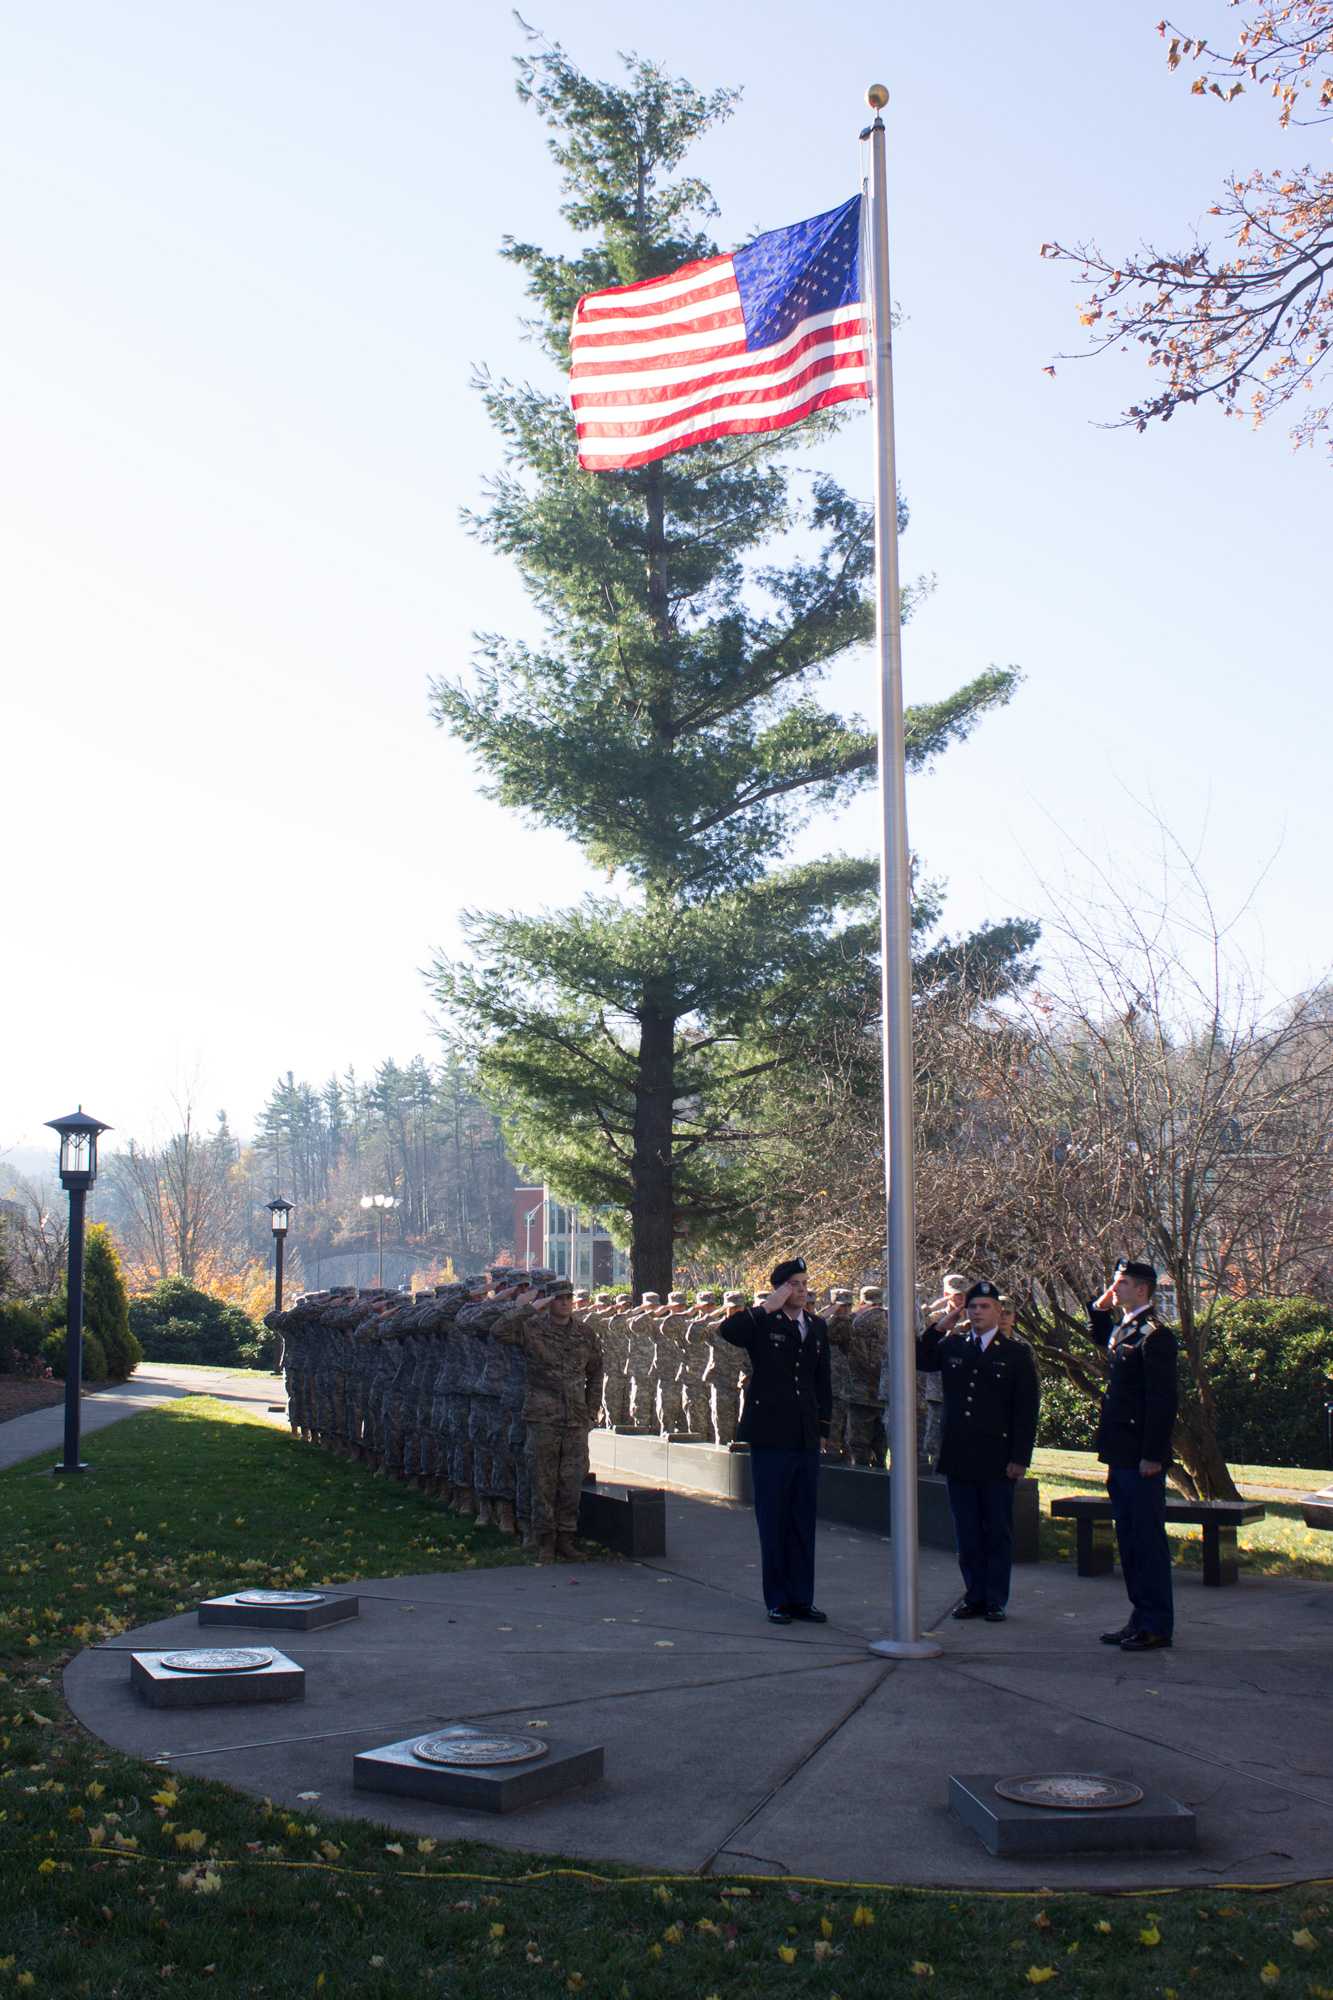 Cadets salute after the raising of the flag at the Veterans Day Ceremony on November 11 near B.B. Dougherty.